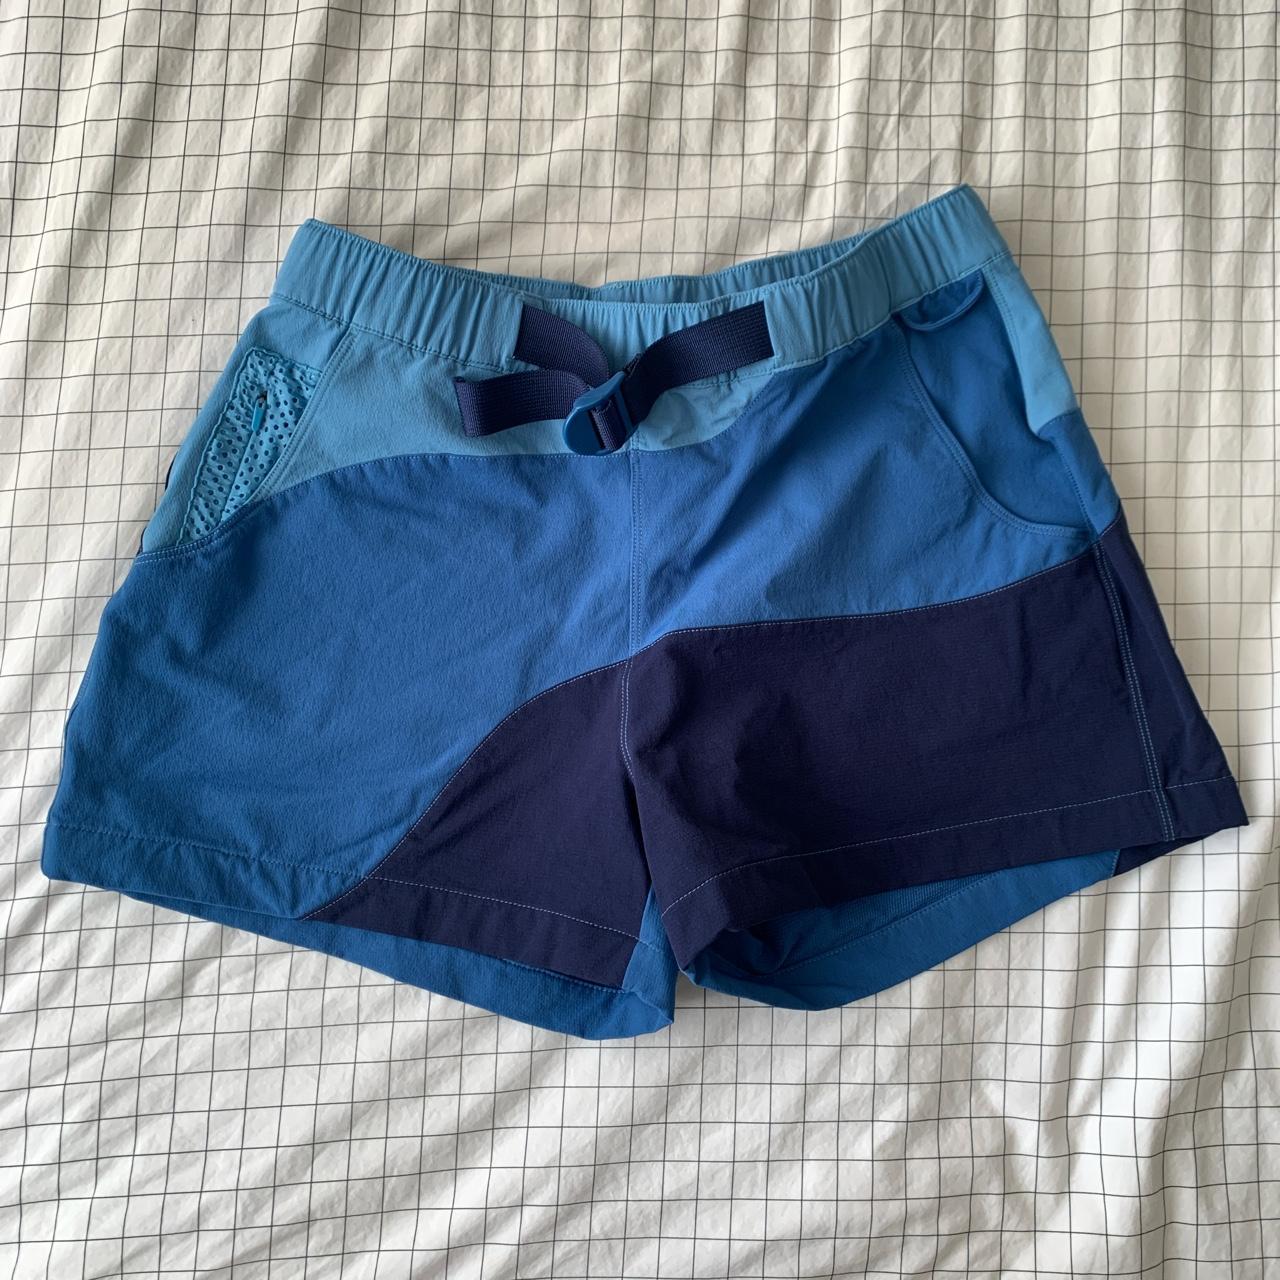 Outdoor Voices Women's Blue and Navy Shorts | Depop